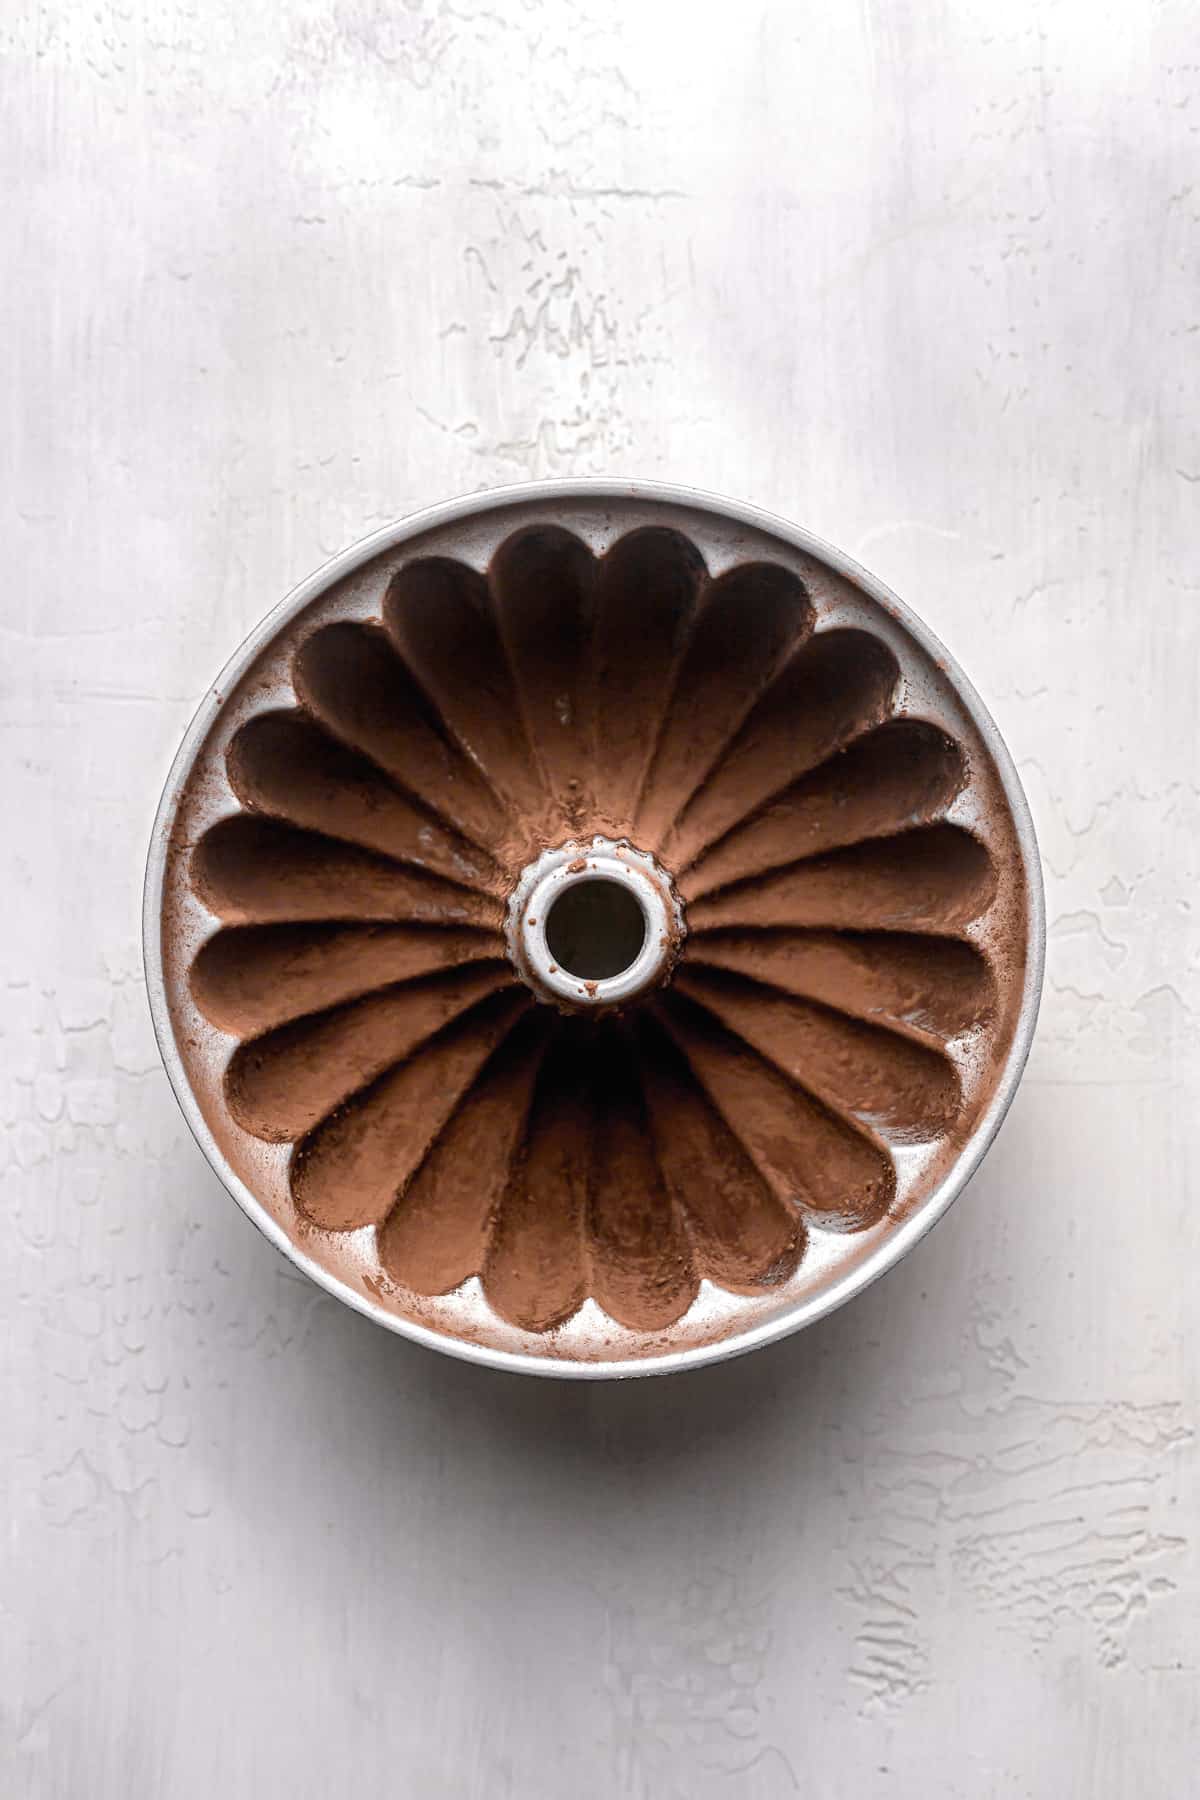 bundt pan coated with cocoa powder